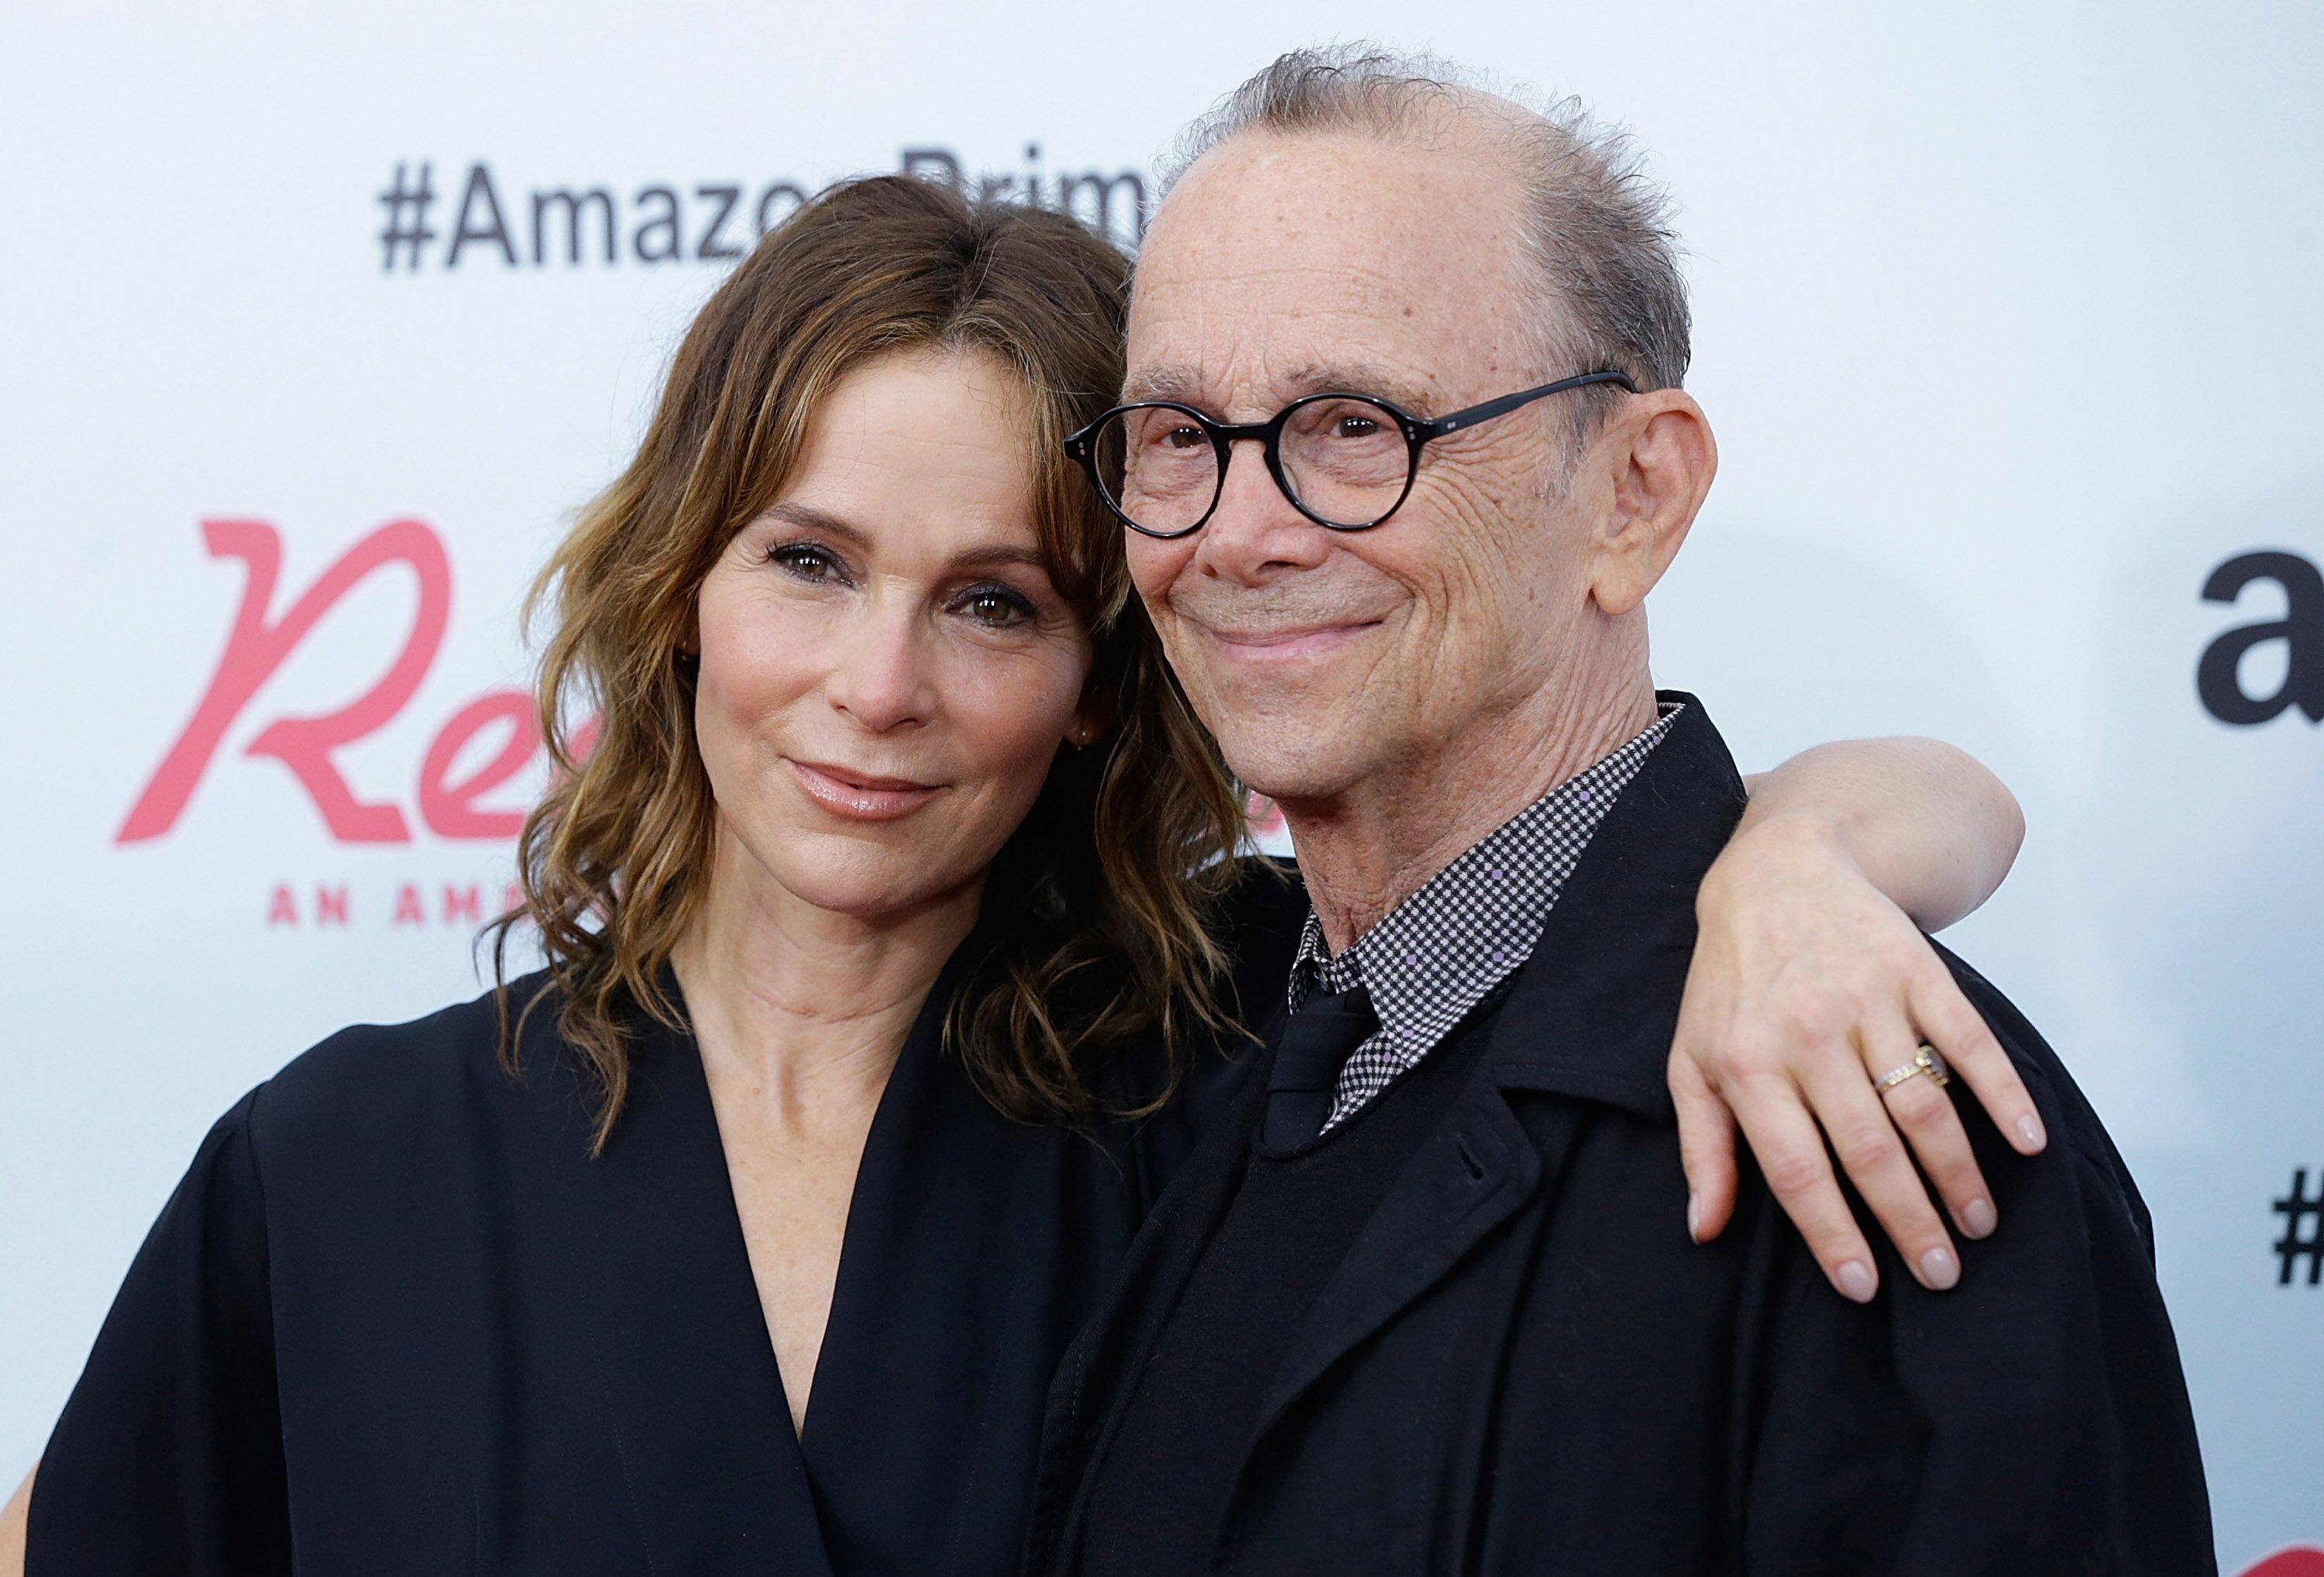 Jennifer Grey and Joel Grey attend "Red Oaks" series premiere in 2015 in New York | Source: Getty Images